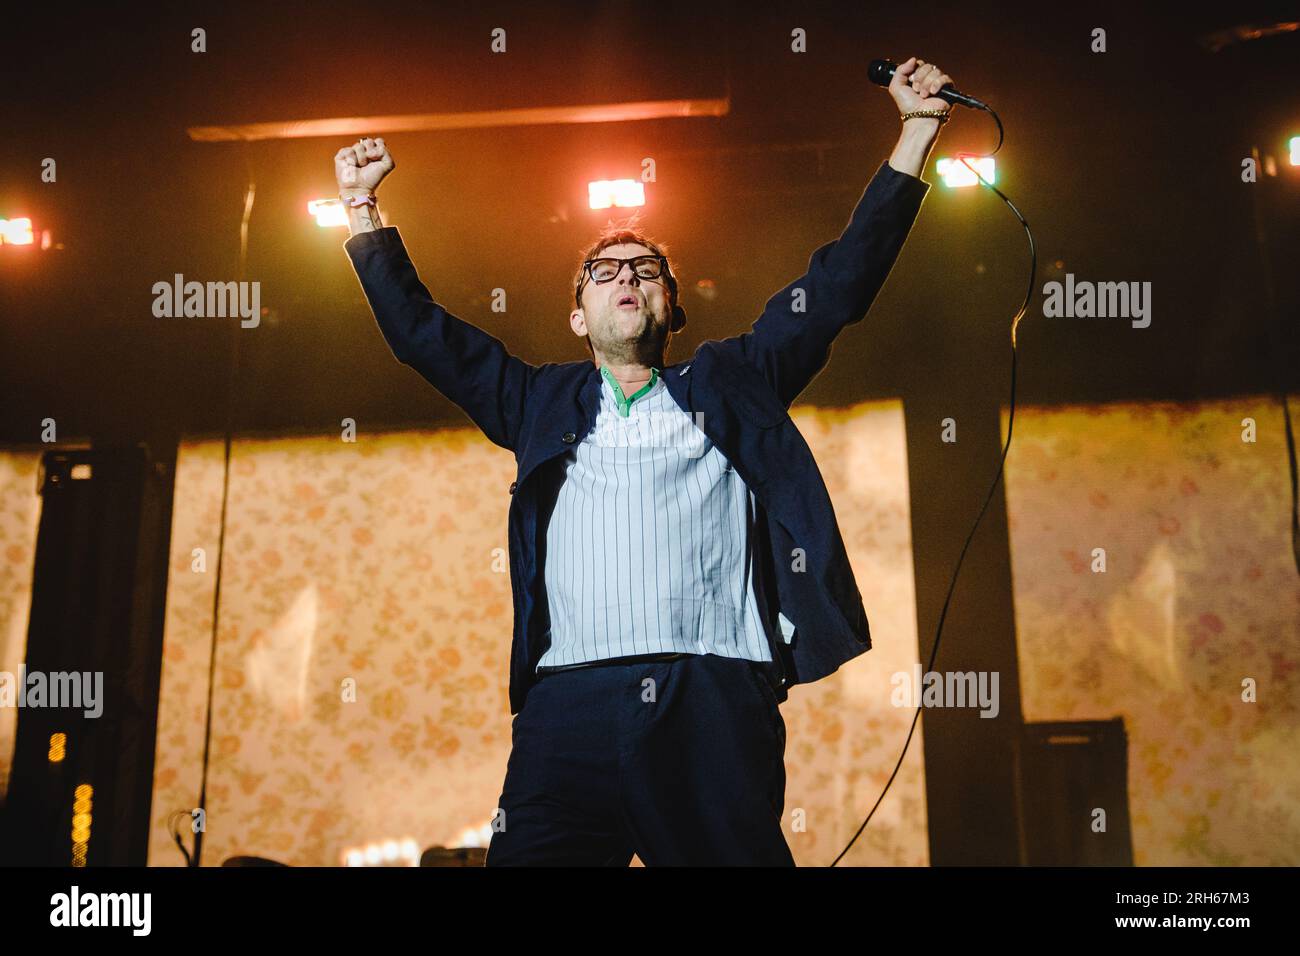 Gothenburg, Sweden. 11th, August 2023. The English Britpop and indie rock band Blur performs a live concert during the Swedish music festival Way Out West 2023 in Gothenburg. Here singer and musician Damon Albarn is seen live on stage. (Photo credit: Gonzales Photo - Tilman Jentzsch). Stock Photo